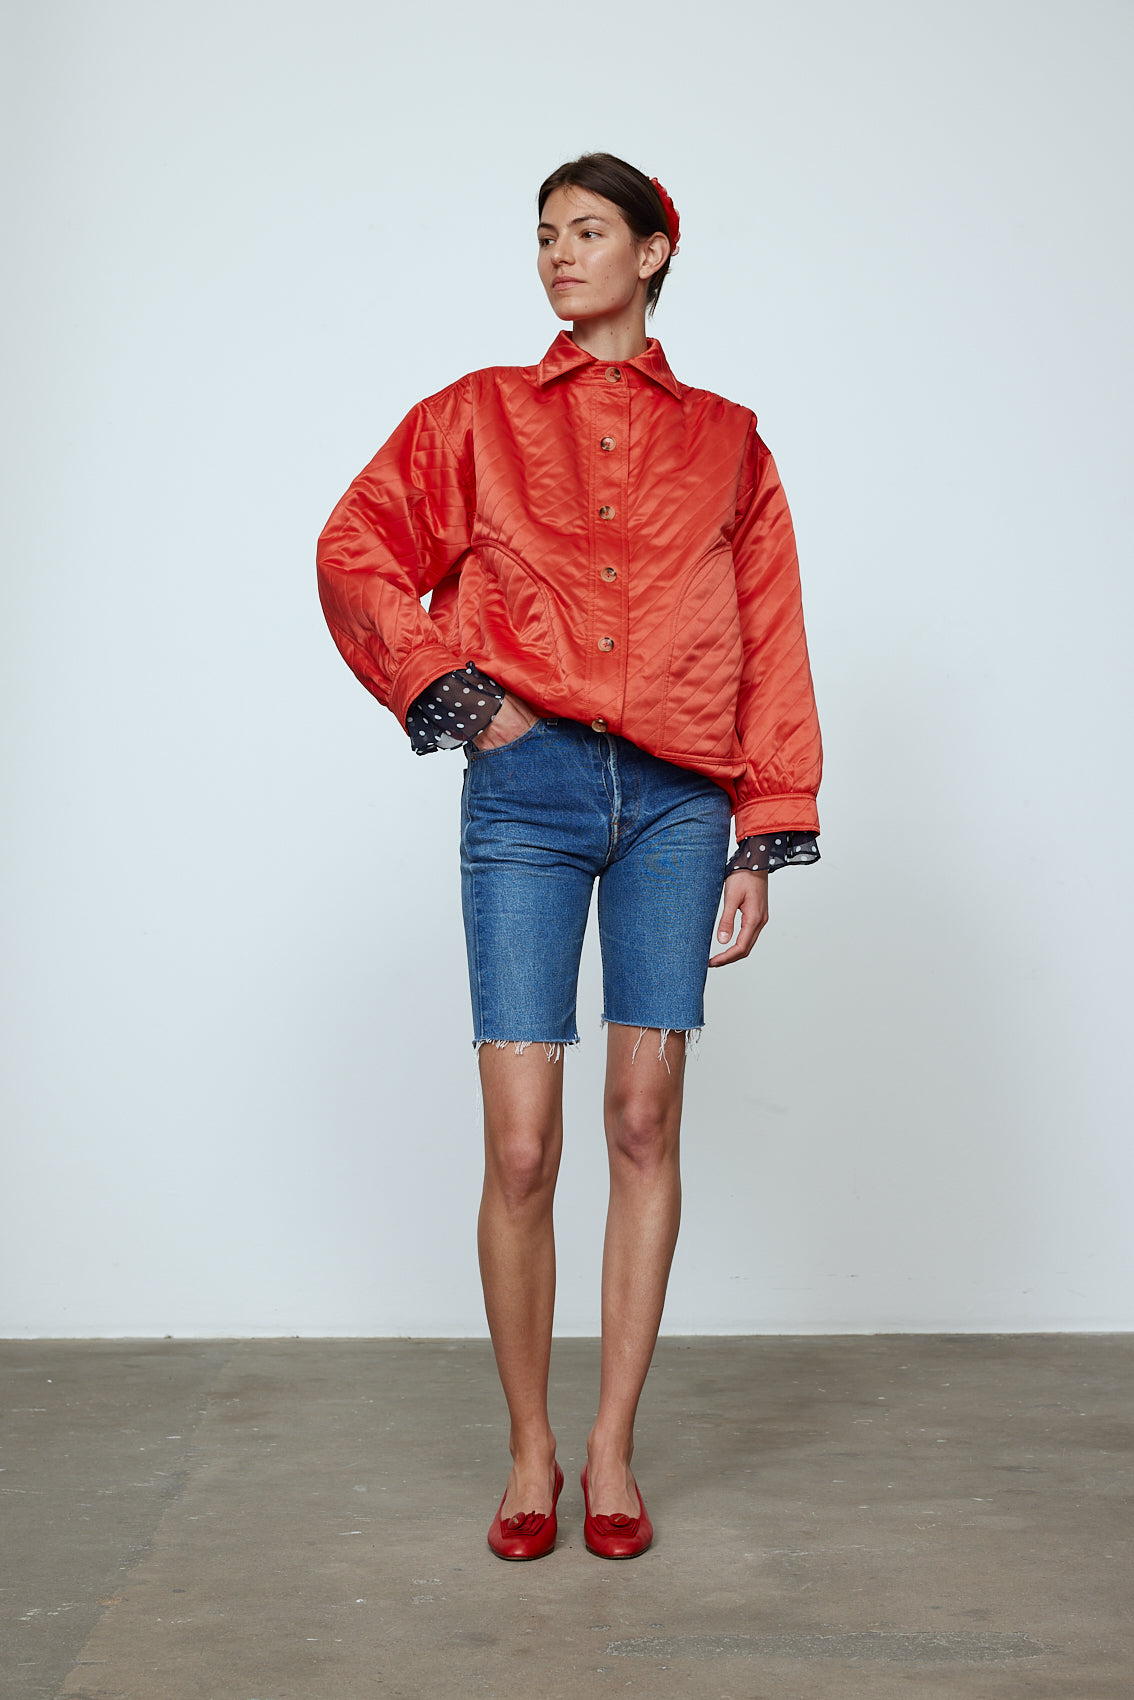 The Mimi Jacket in Orange Duchess. A new rounded shape inspired by the 80s in shiny quilted fabric with orange lining and big round buttons.  Style it over dresses, jeans, or shorts.   Material: 100% polyester. Lining: 100% viscose.